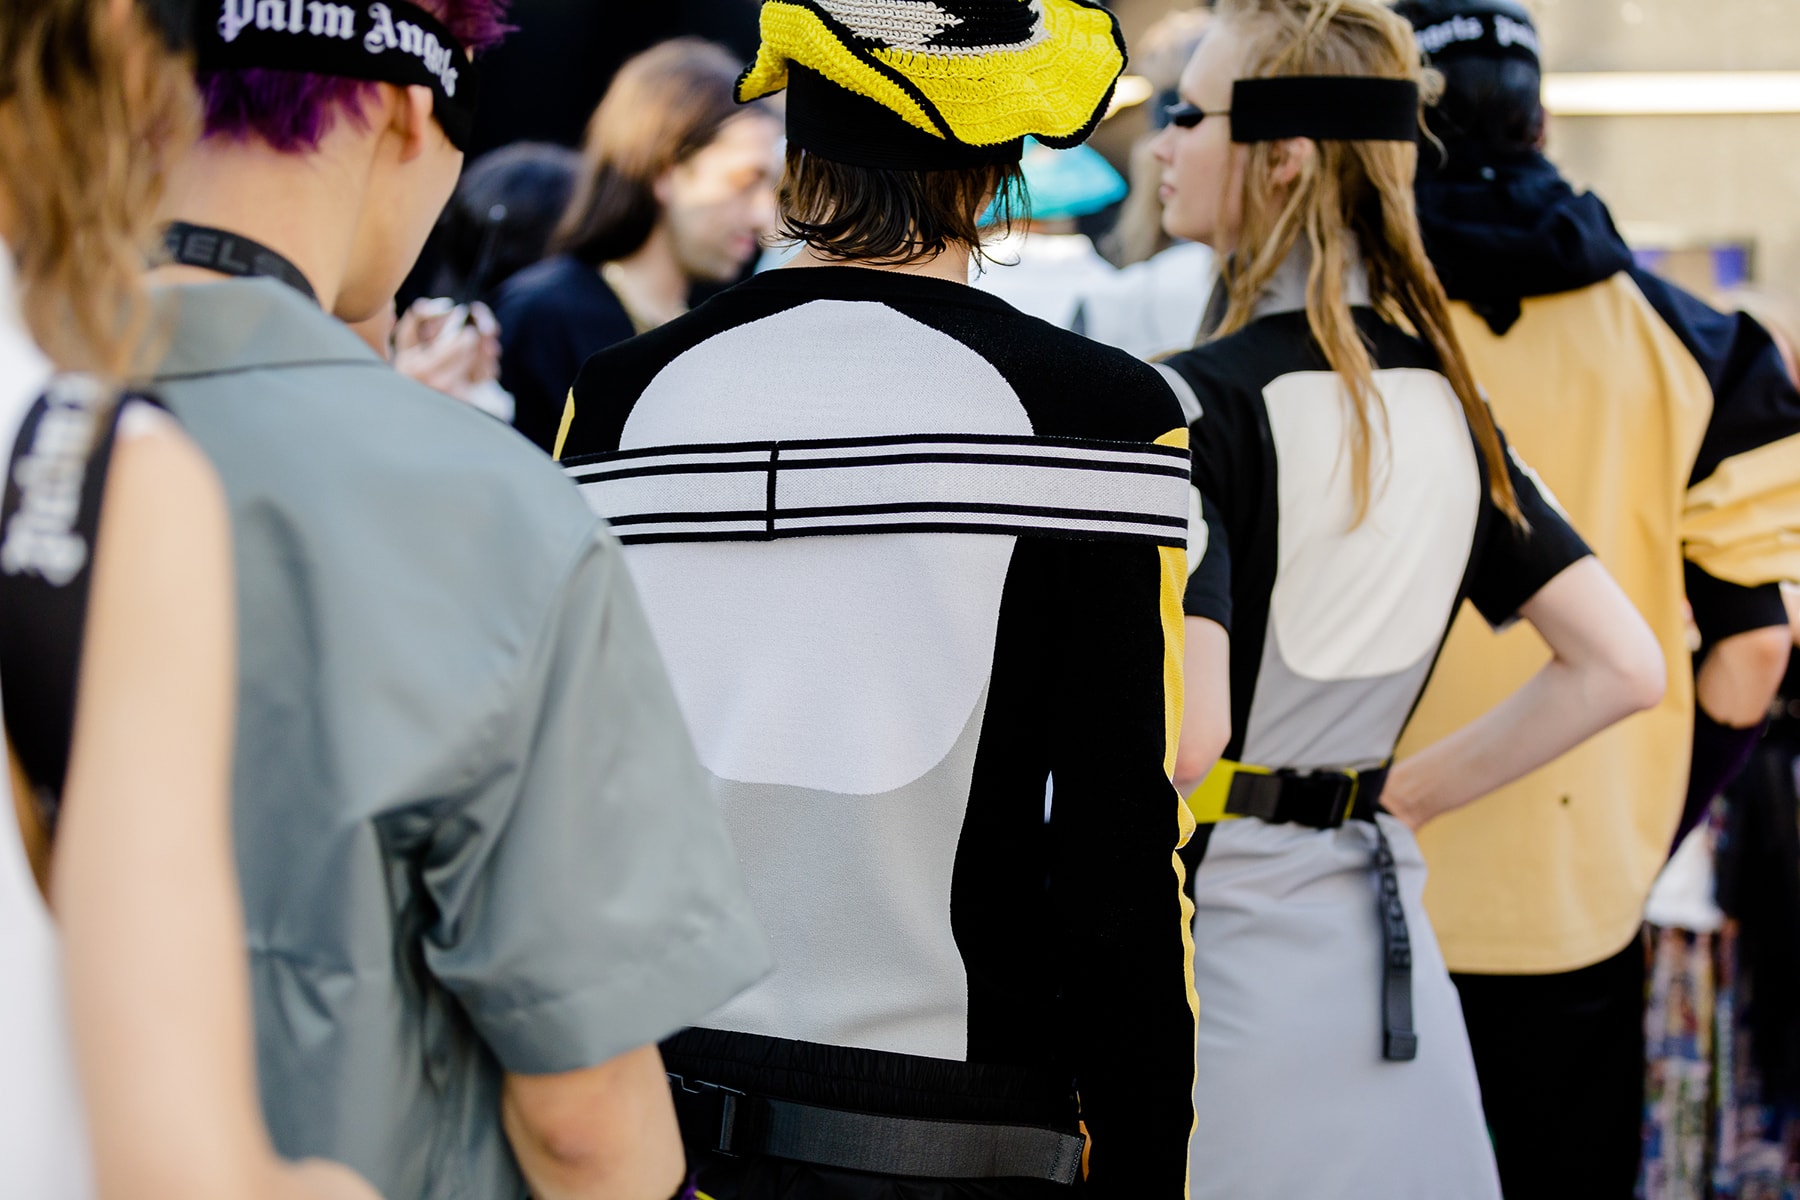 palm angels spring summer 2019 milan fashion week woven knit hat yellow white grey black shirt long sleeve strap belt tanning bed sunglasses goggles